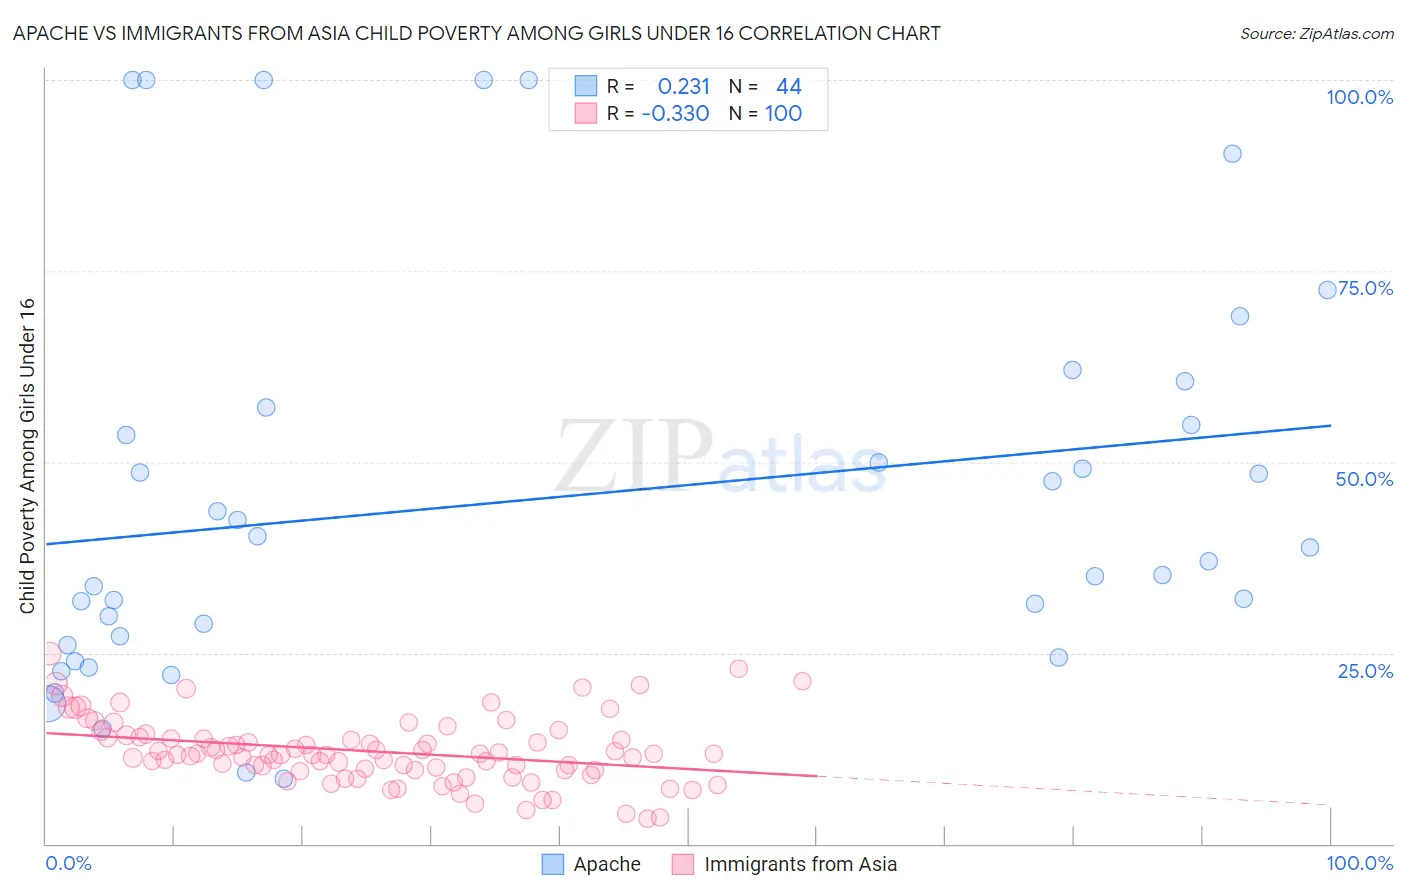 Apache vs Immigrants from Asia Child Poverty Among Girls Under 16